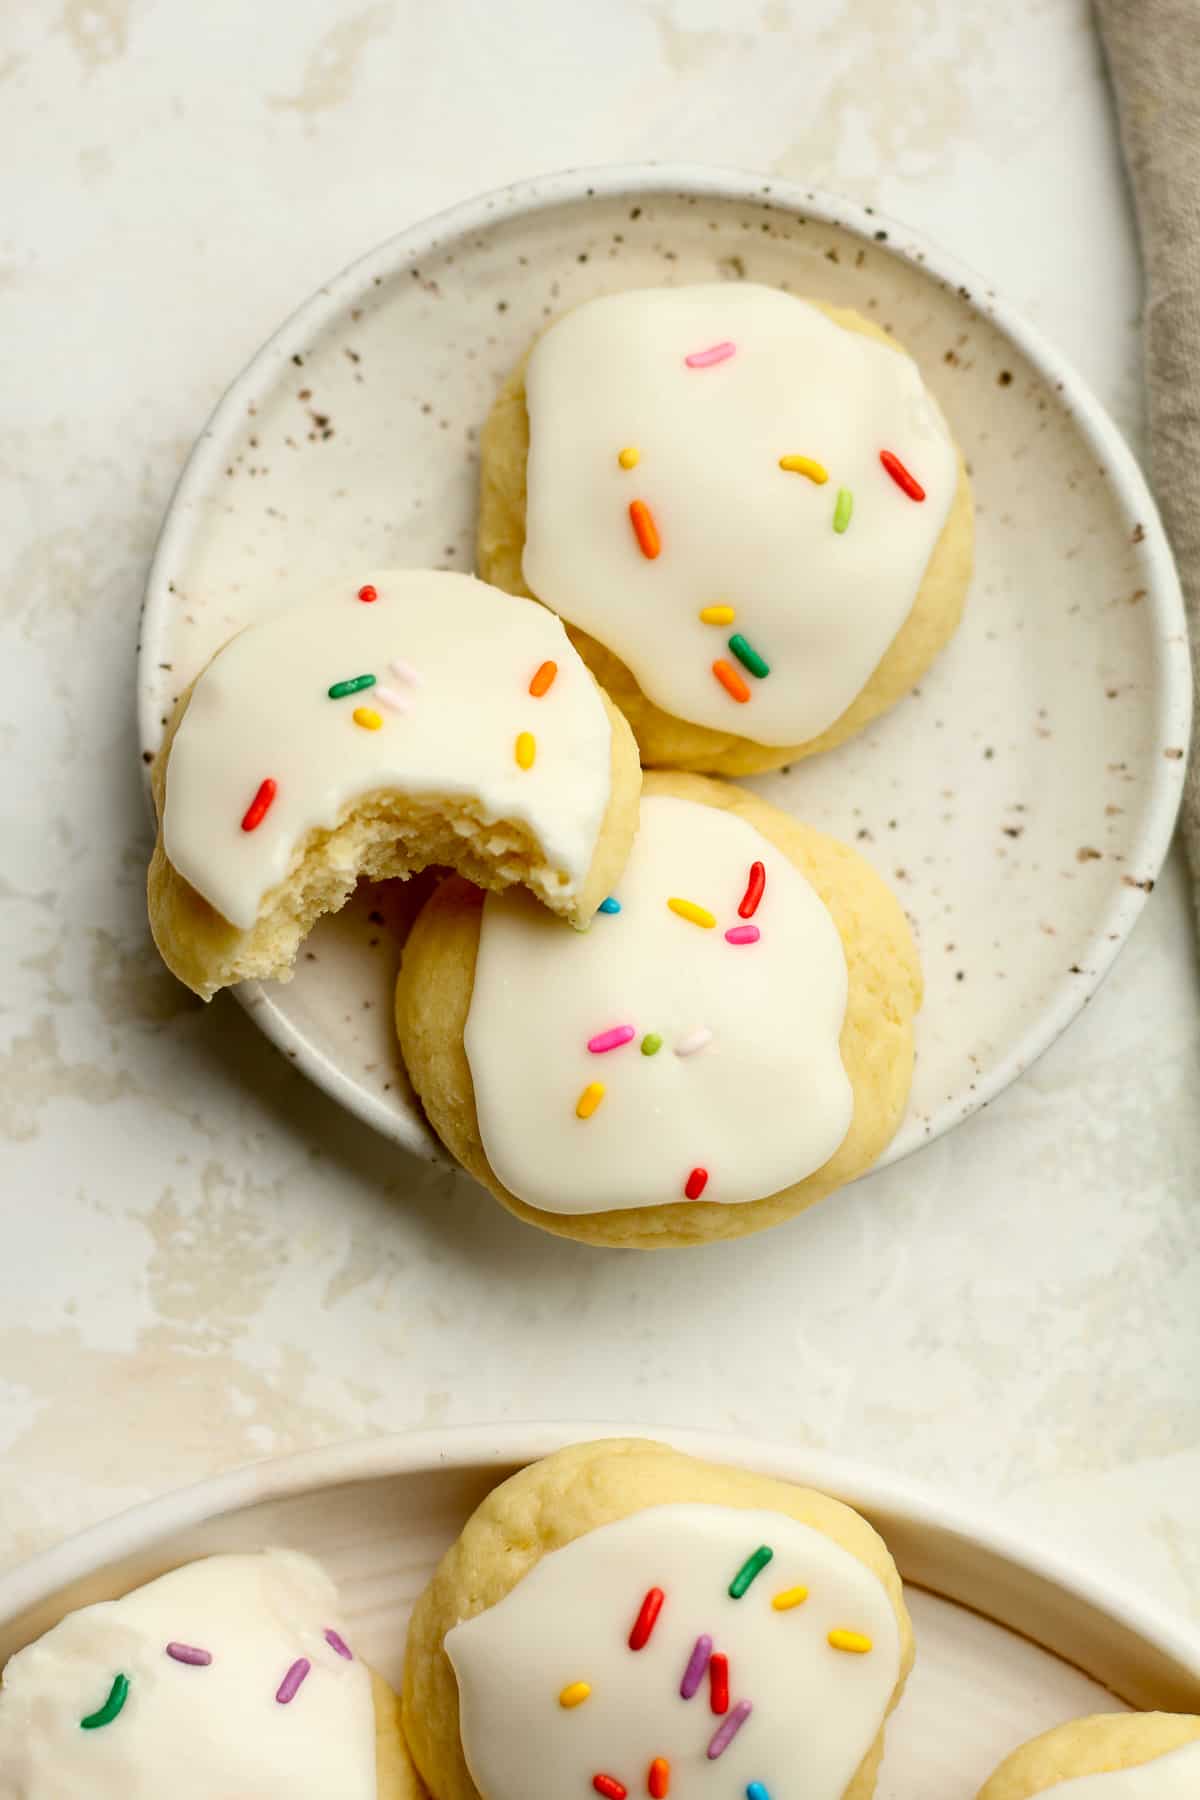 A small plate of lemon ricotta cookies with sprinkles.